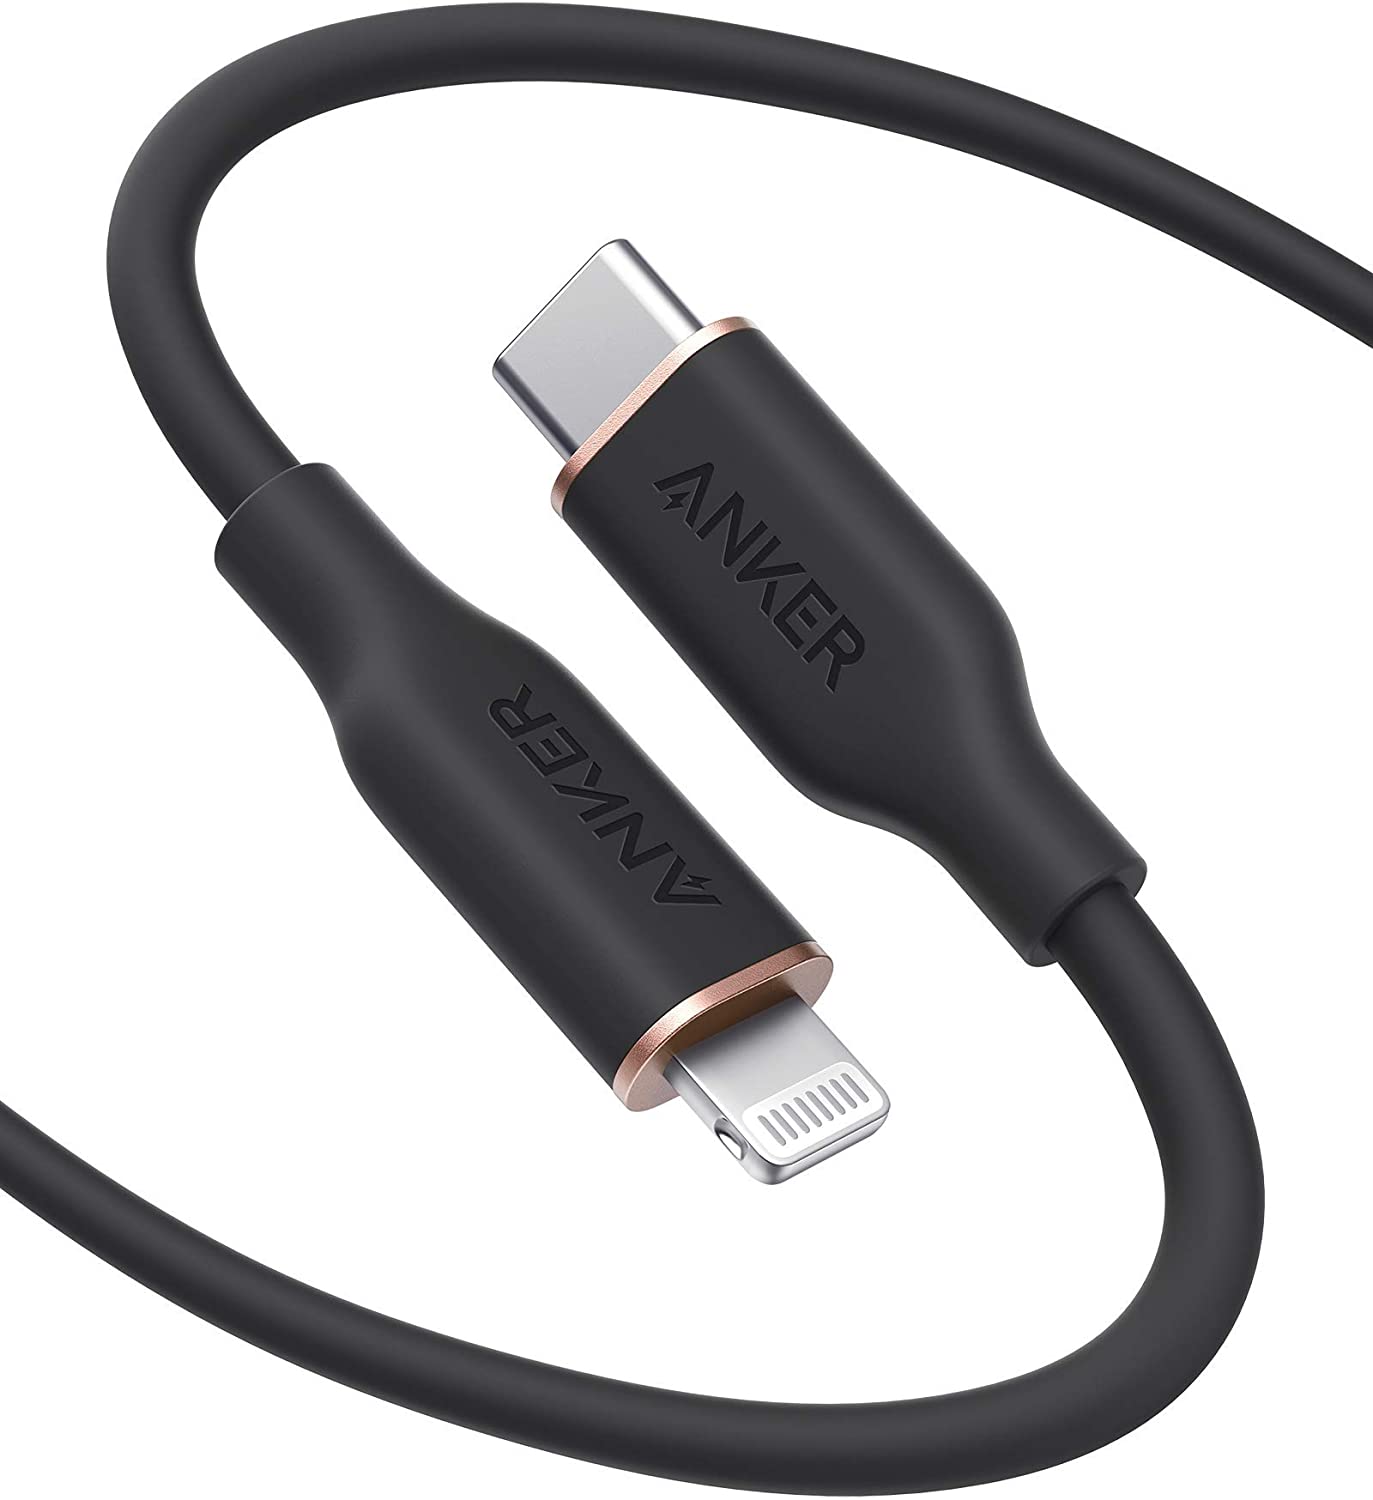 Anker Powerline Iii Flow USB-C To Lightning Cable 1.8M – Black